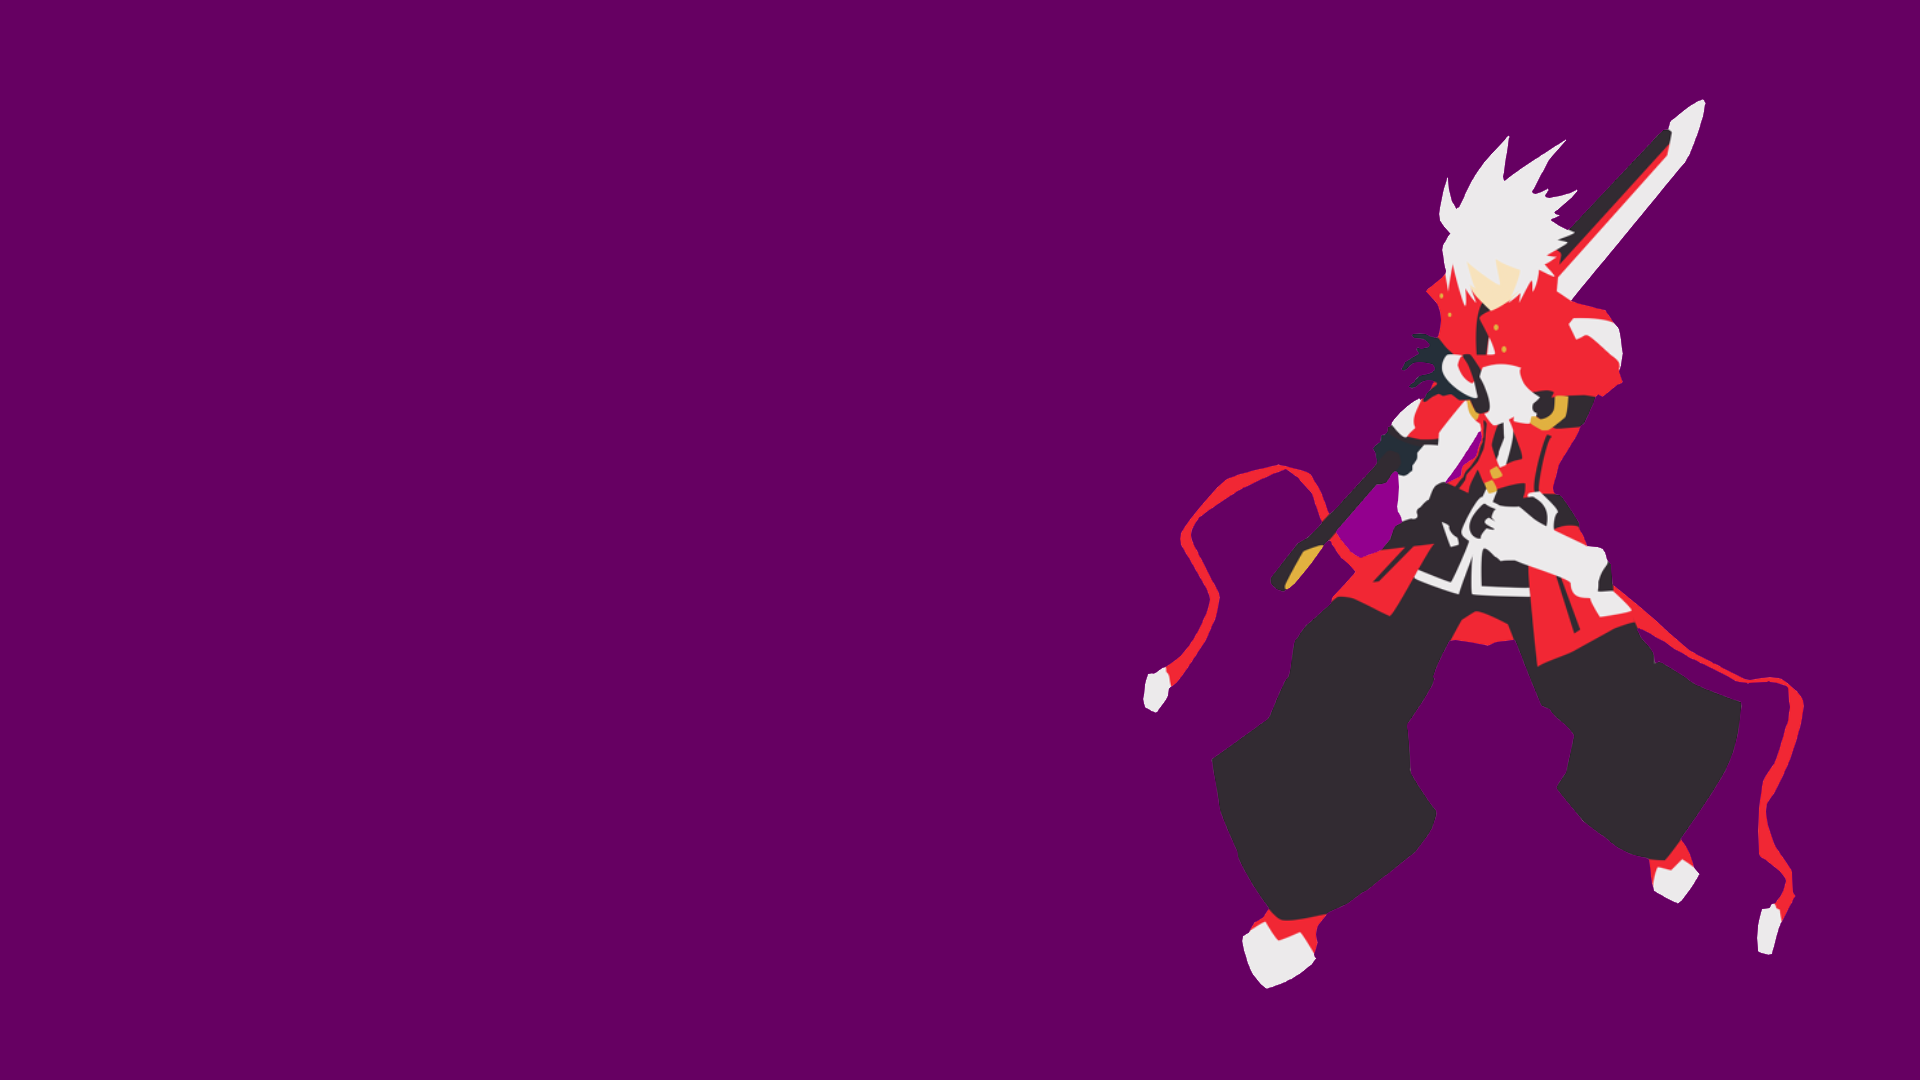 BlazBlue Centralfiction Wallpapers